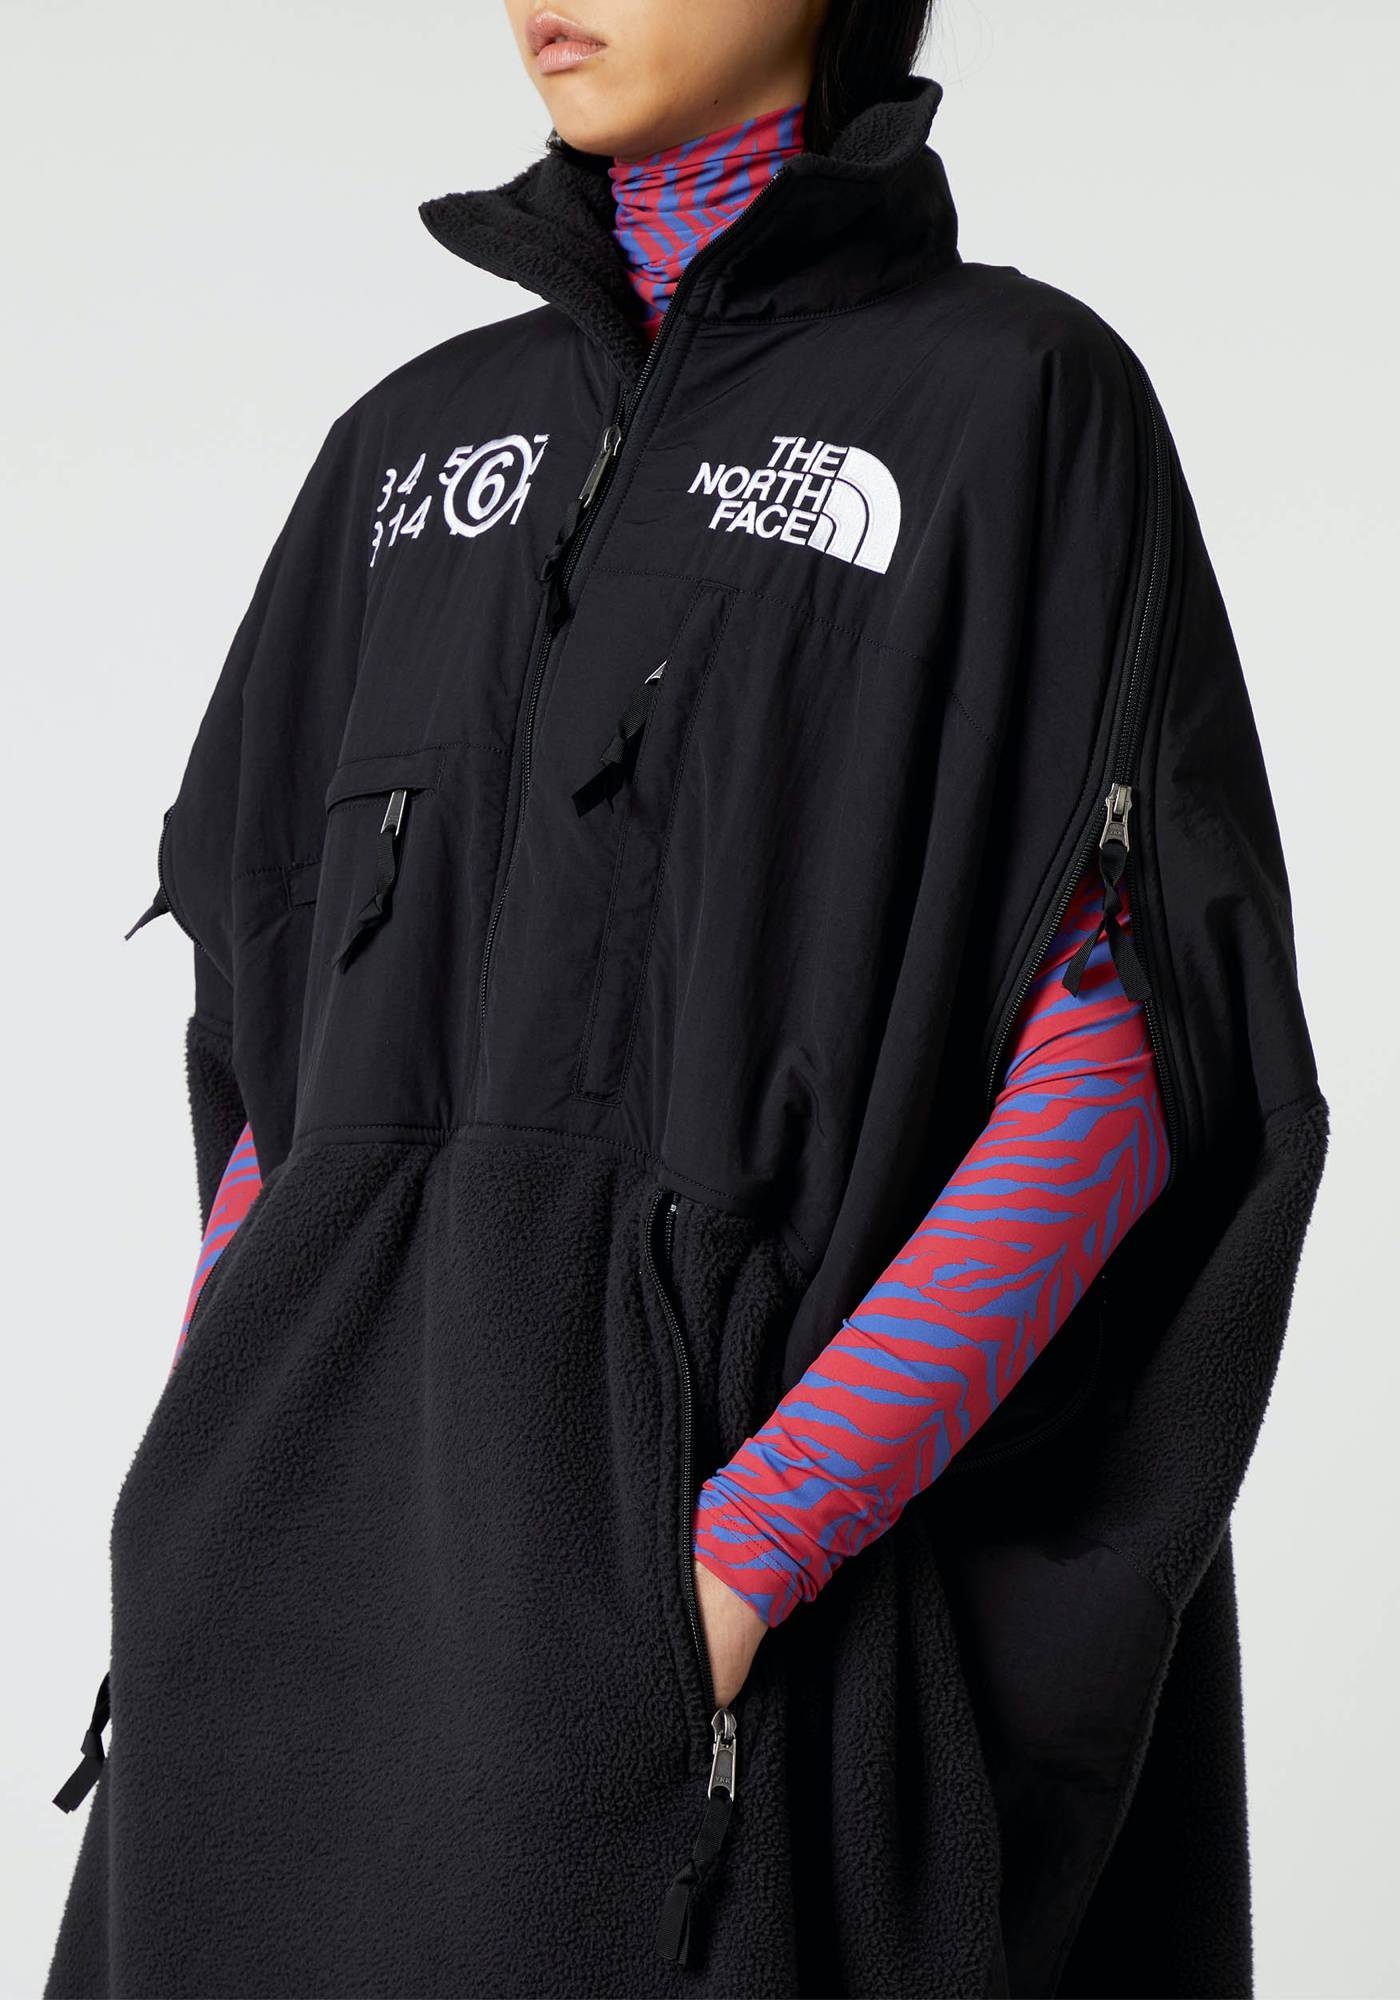 The North Face | MM6